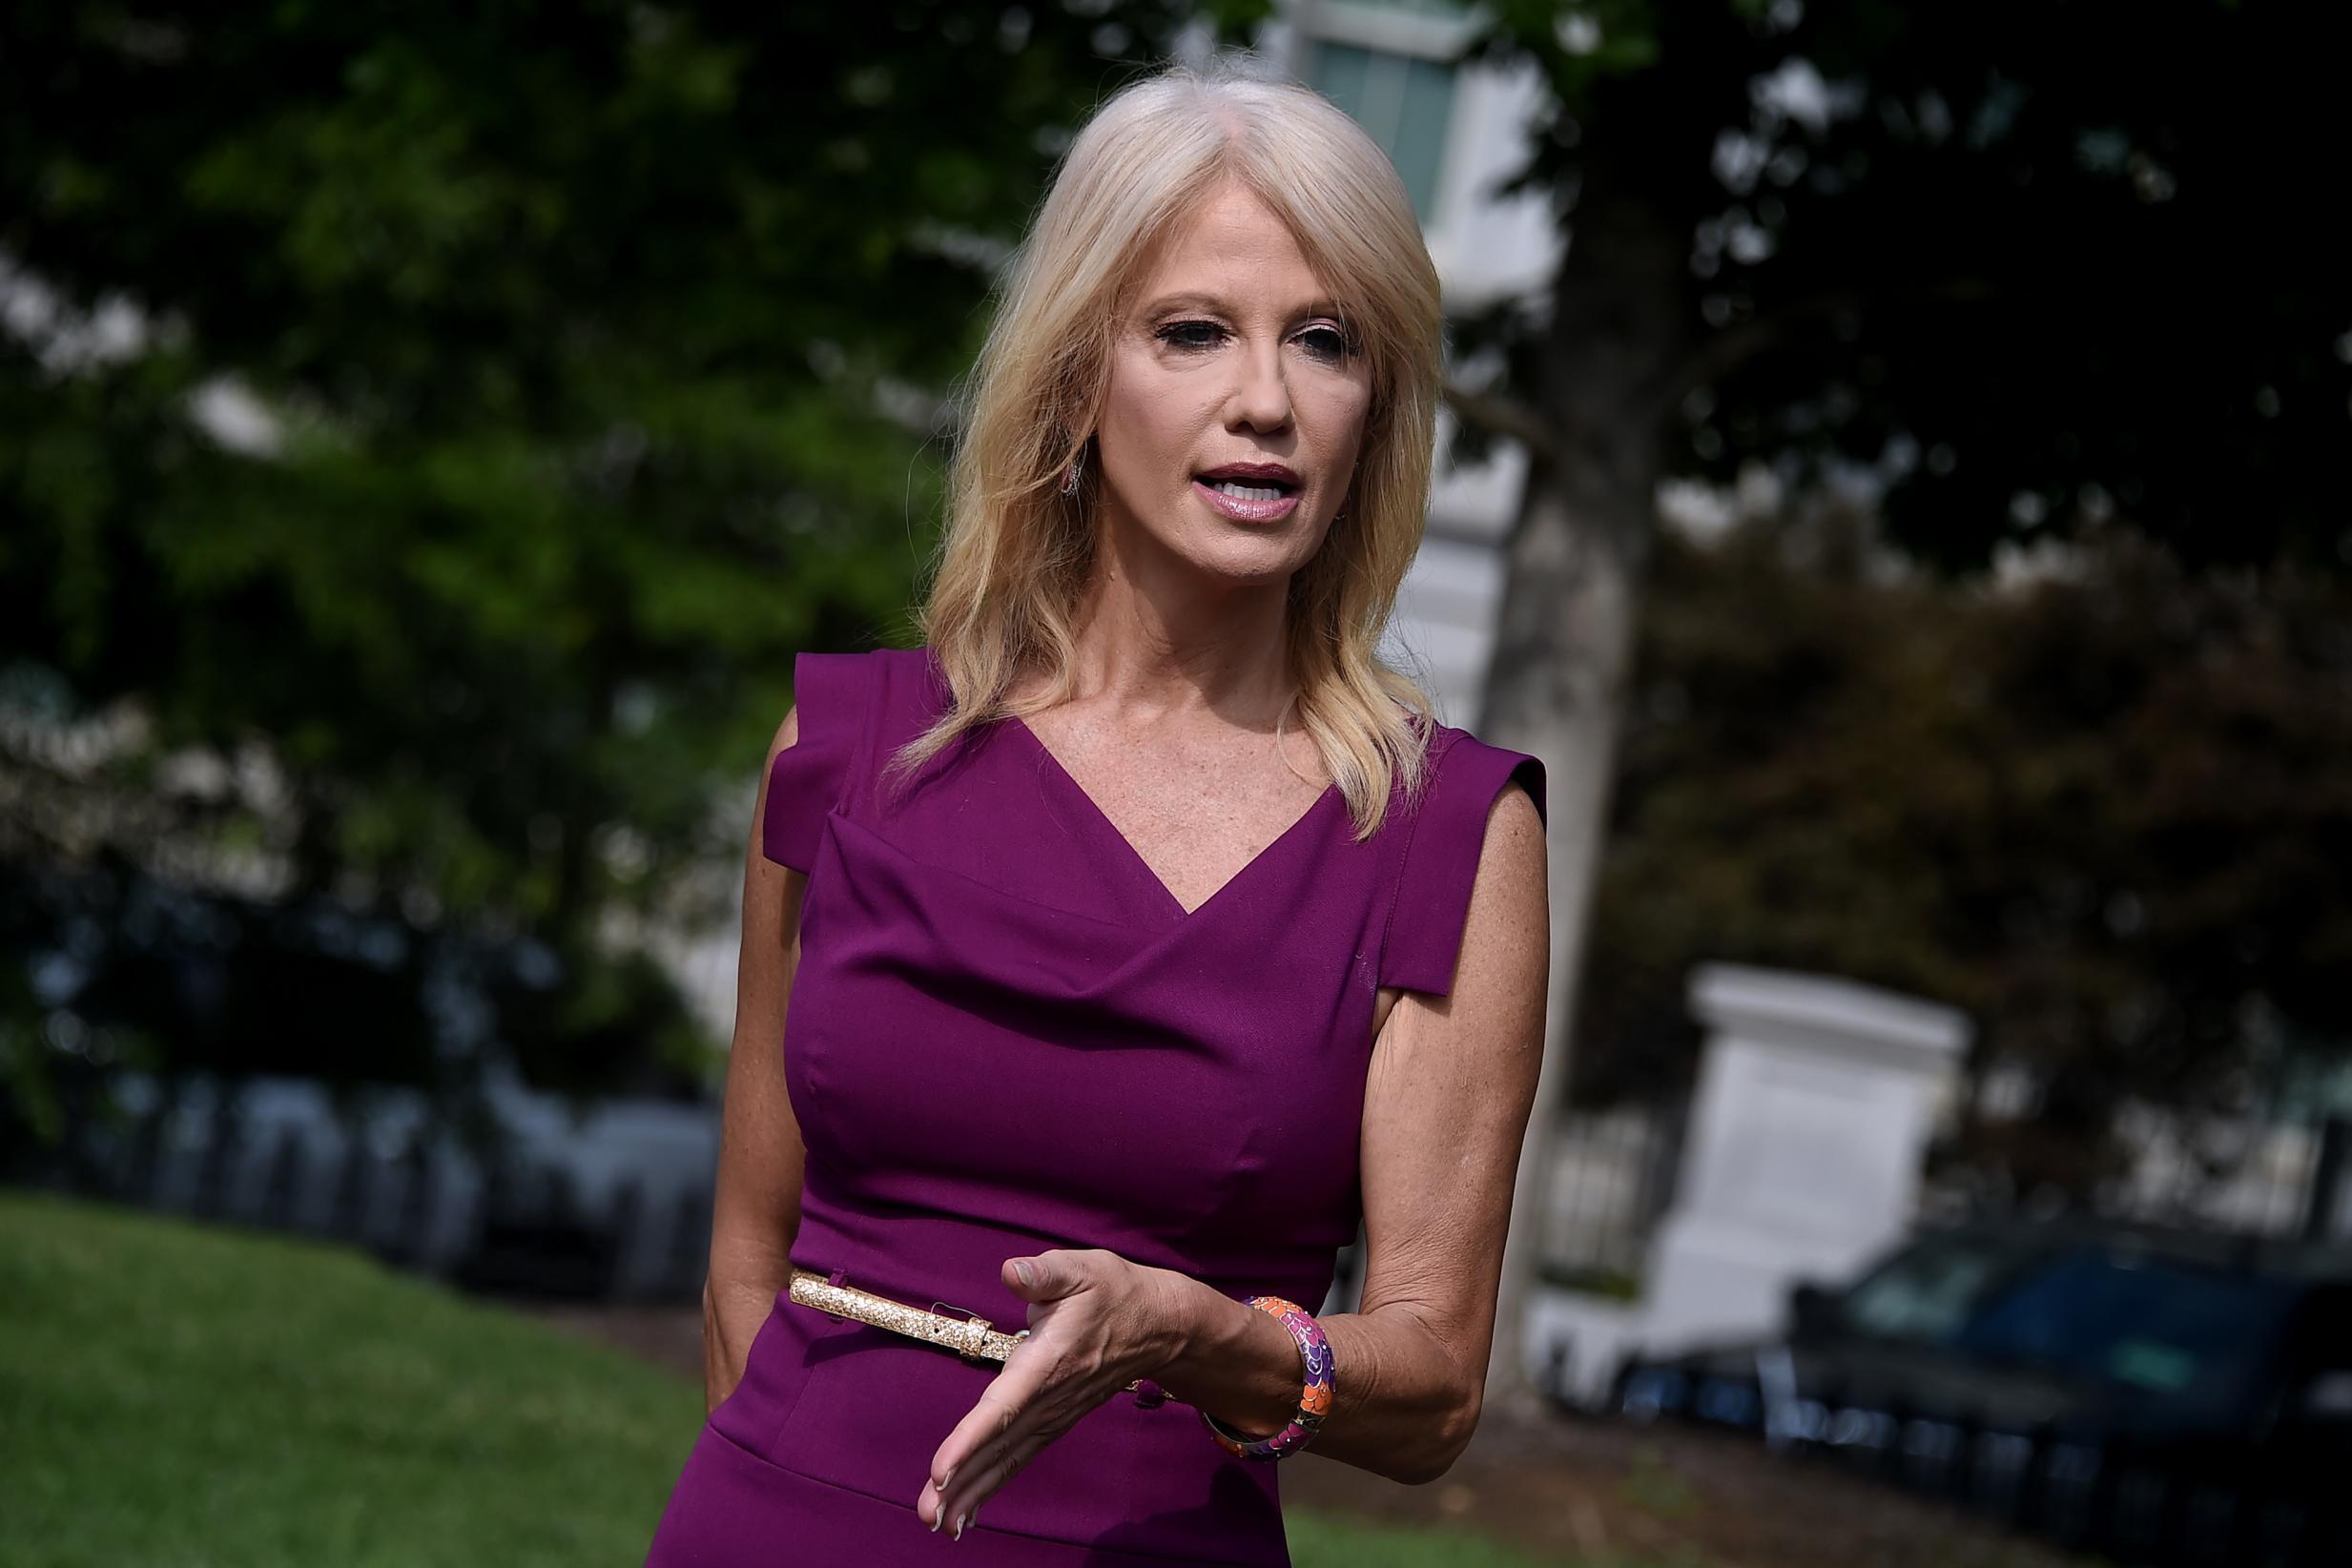 Kellyanne Conway stepped down for 'family reasons'. So what now for American politics' strangest family?